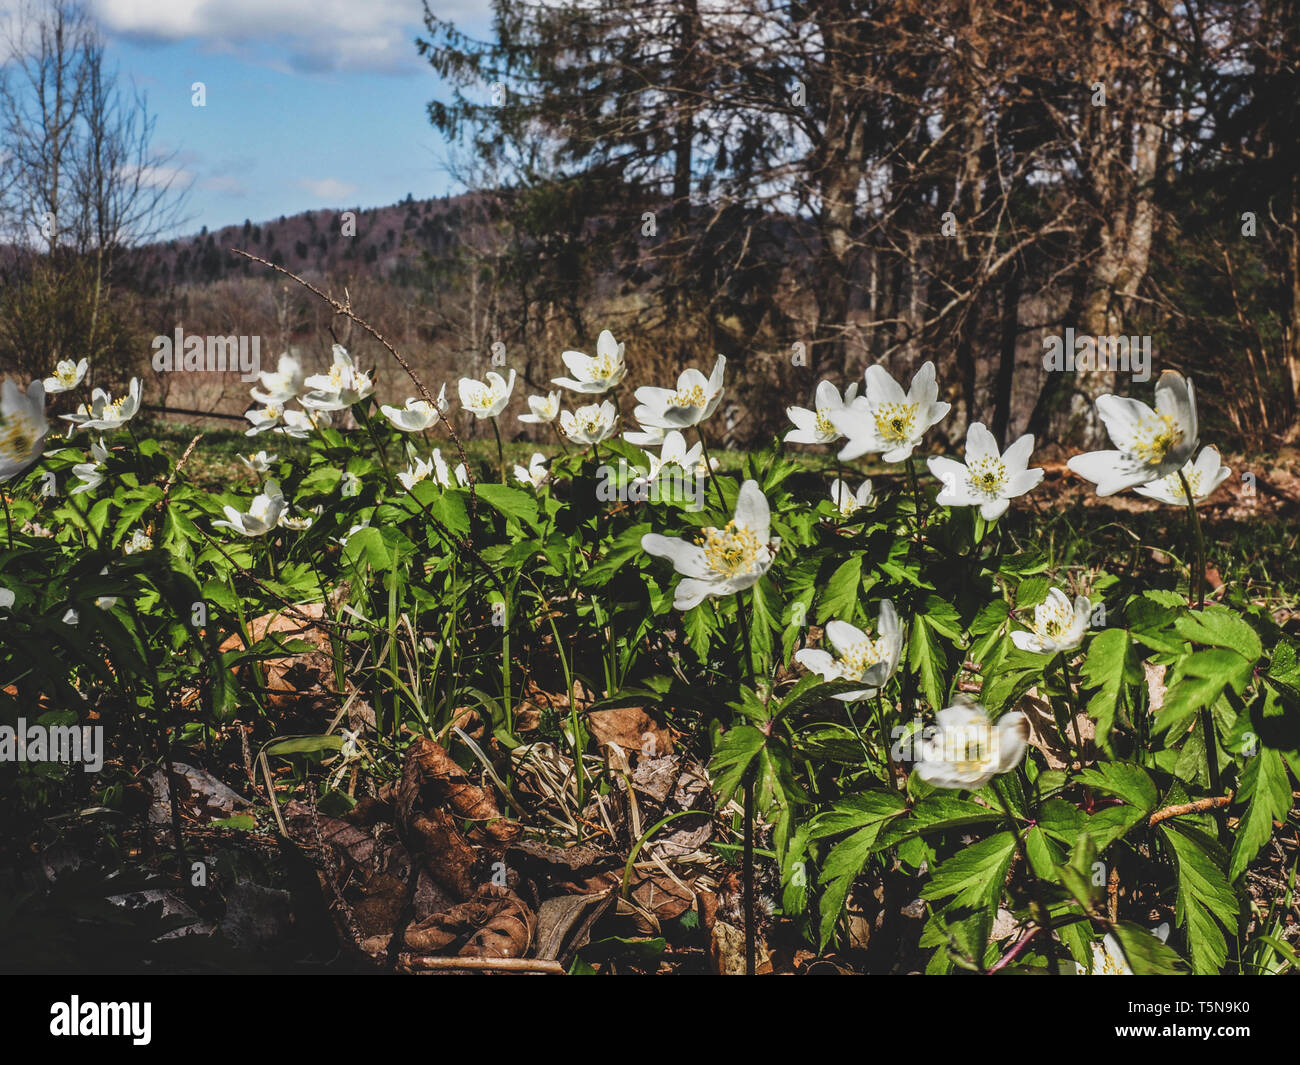 Early spring white flowers on a mountain meadow. Anemone is a genus of  about 200 species of flowering plants in the family Ranunculaceae. Wood  Anemone Stock Photo - Alamy